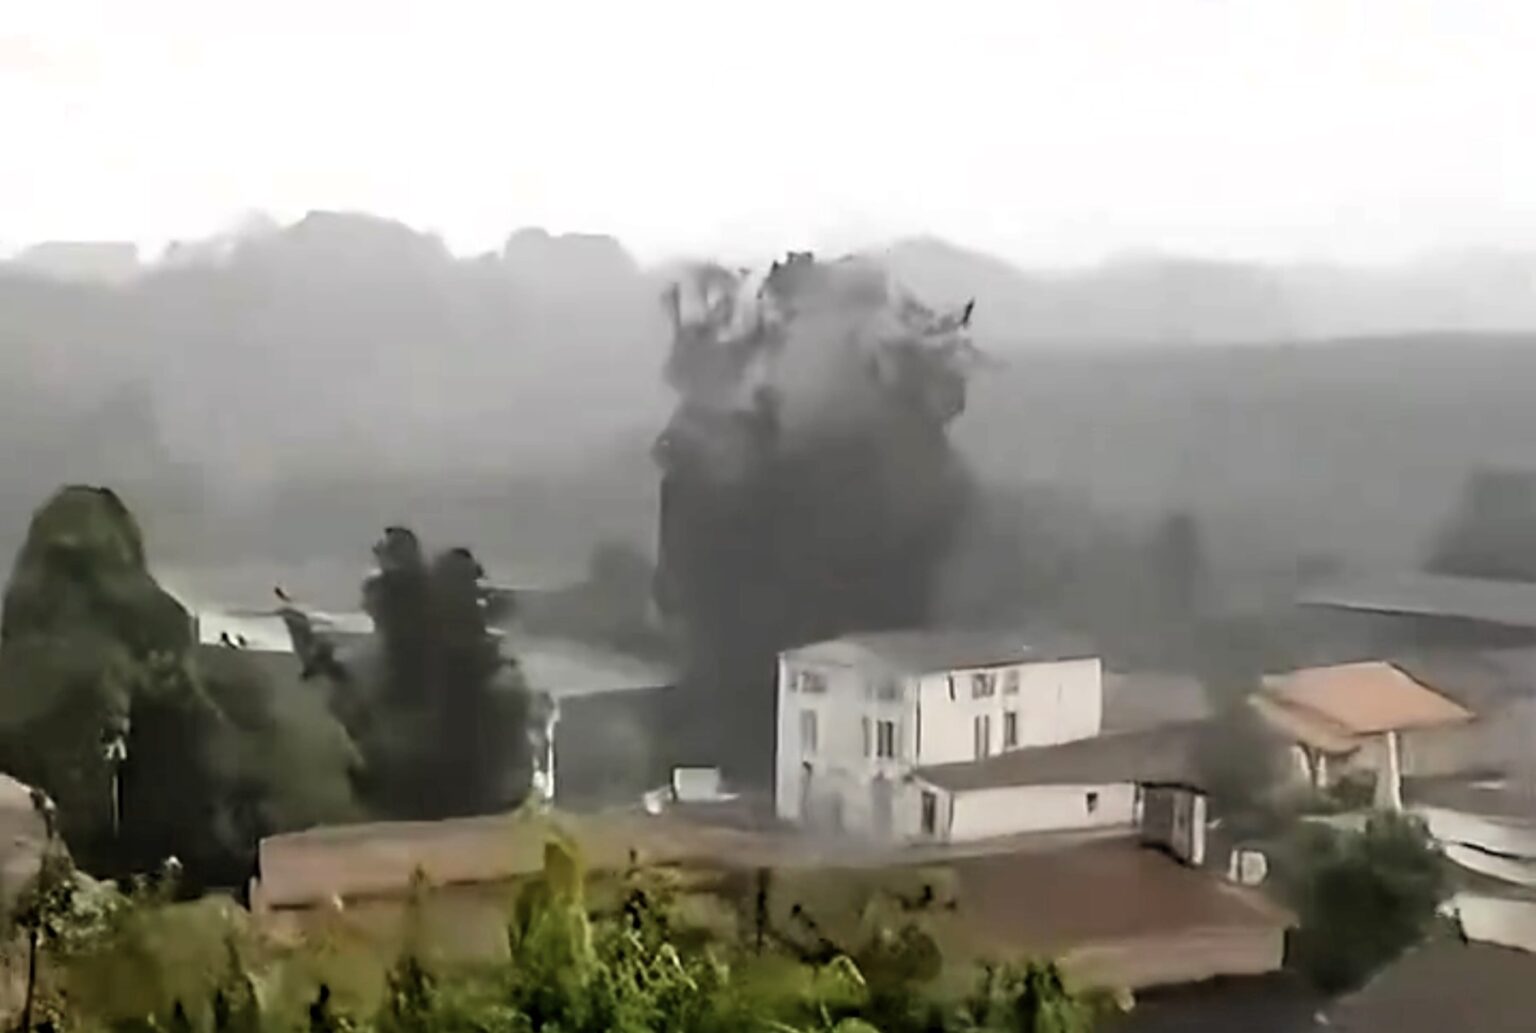 Watch as a massive tree explodes into pieces after a lightning strike in Augé, France. The storm also caused multiple fatalities and severe damage across the region.